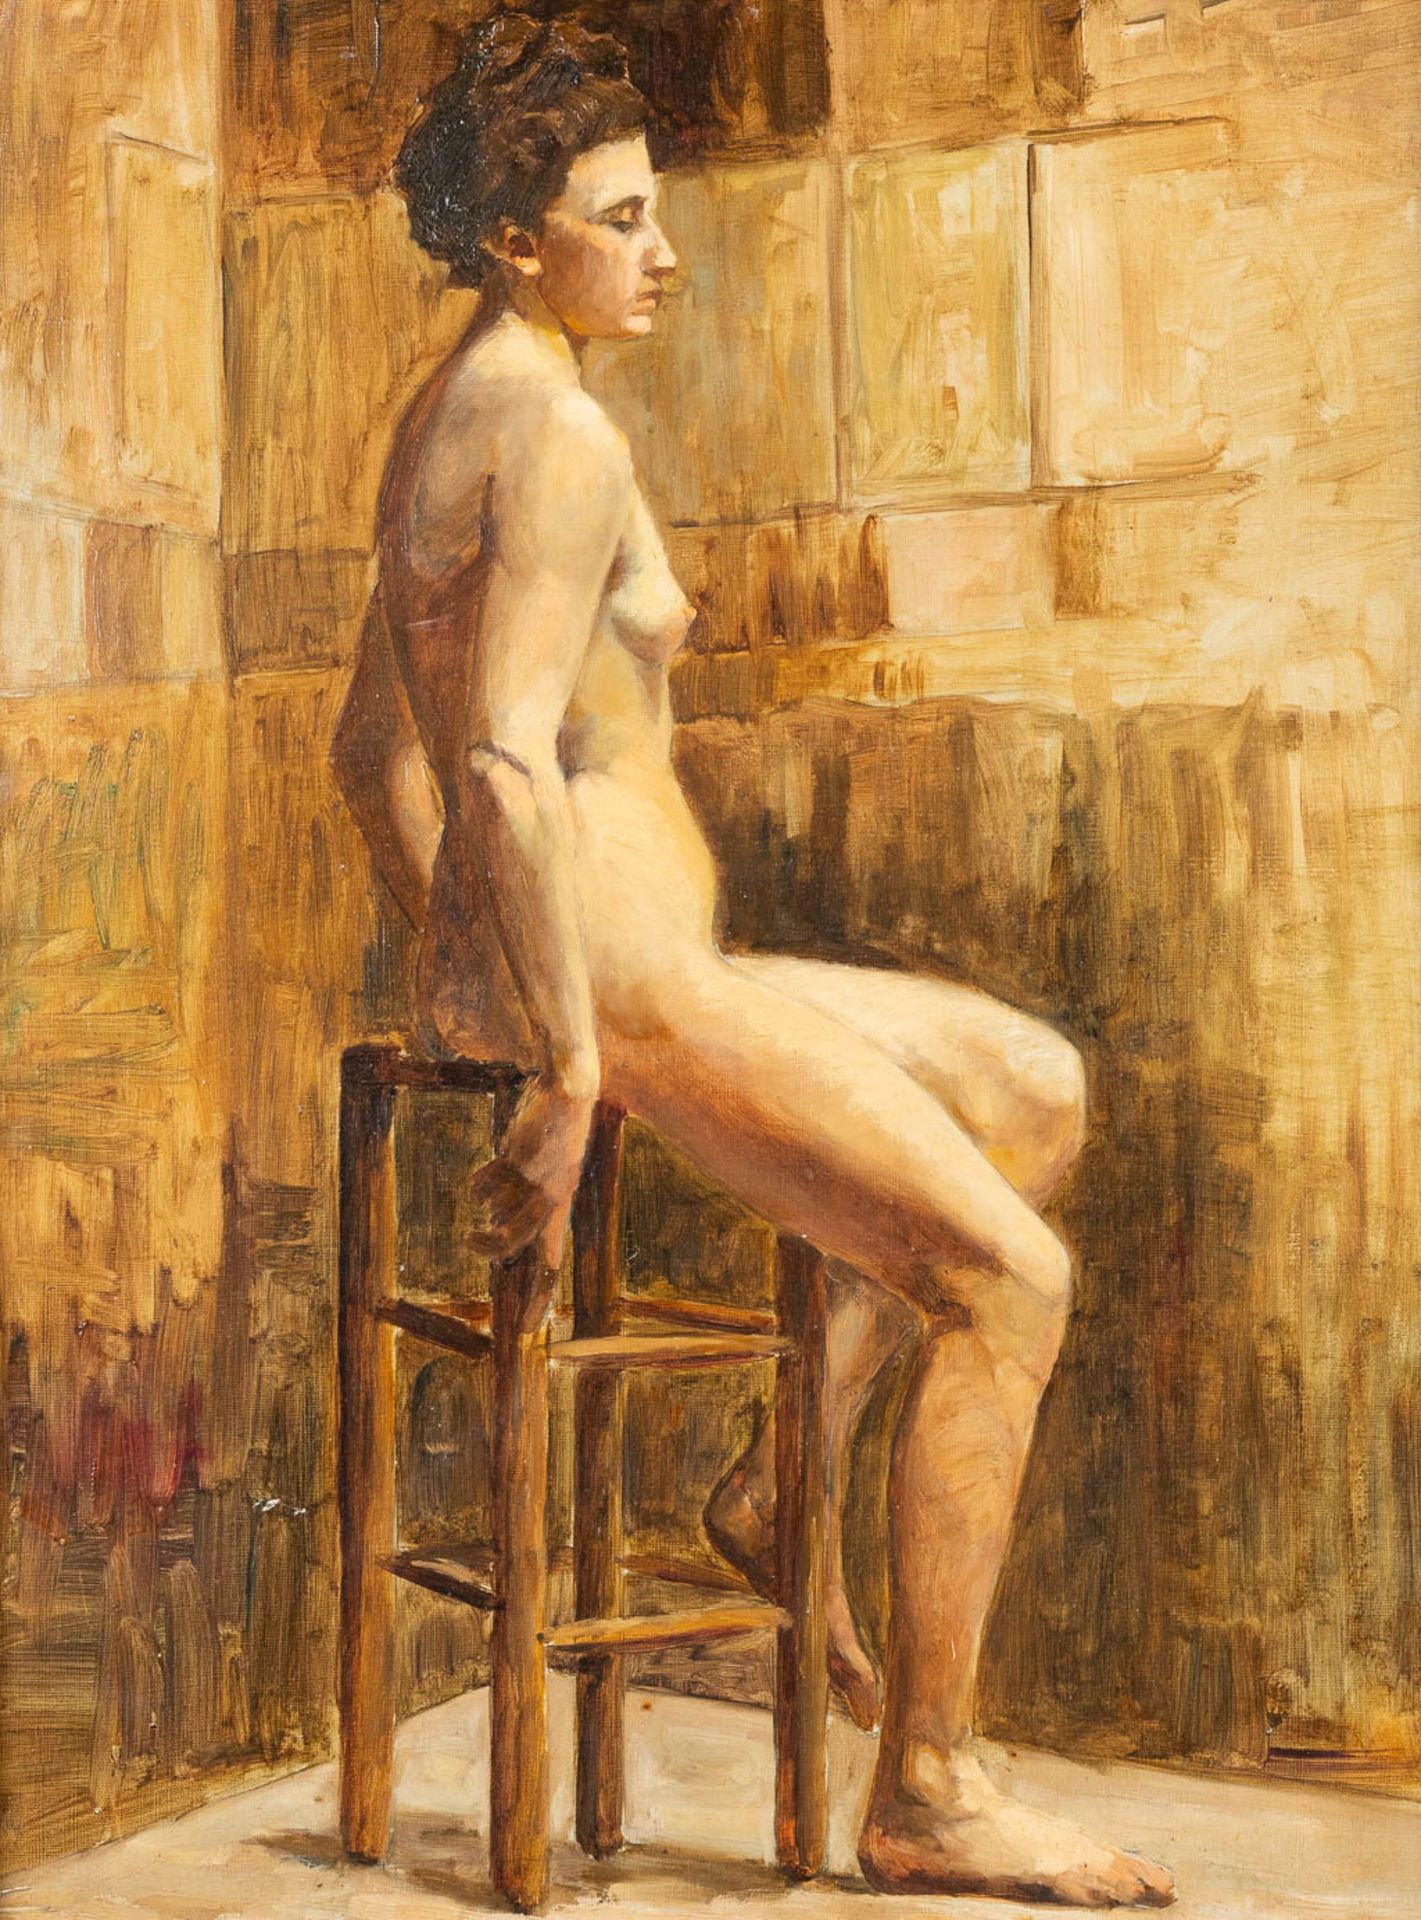 A painting 'Posing Nude Figurine', probably made in France. Oil on canvas (W:47 x H:61 cm)